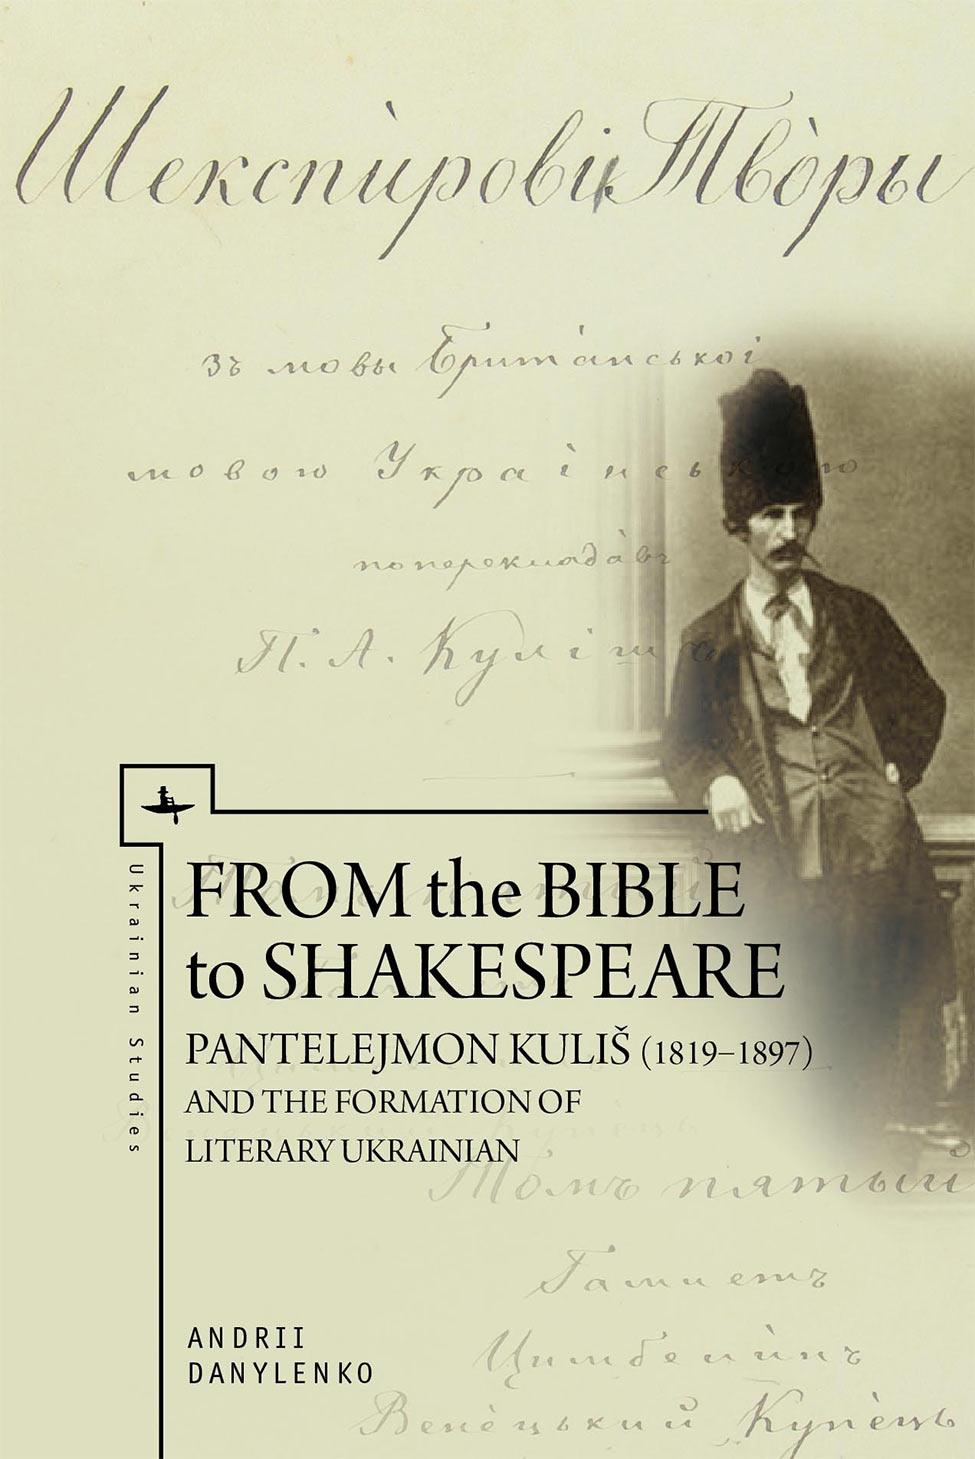 From The Bible To Shakespeare: Pantelejmon Kuliš (1819-97) And The Formation Of Literary Ukranian by Andriy Danylenko